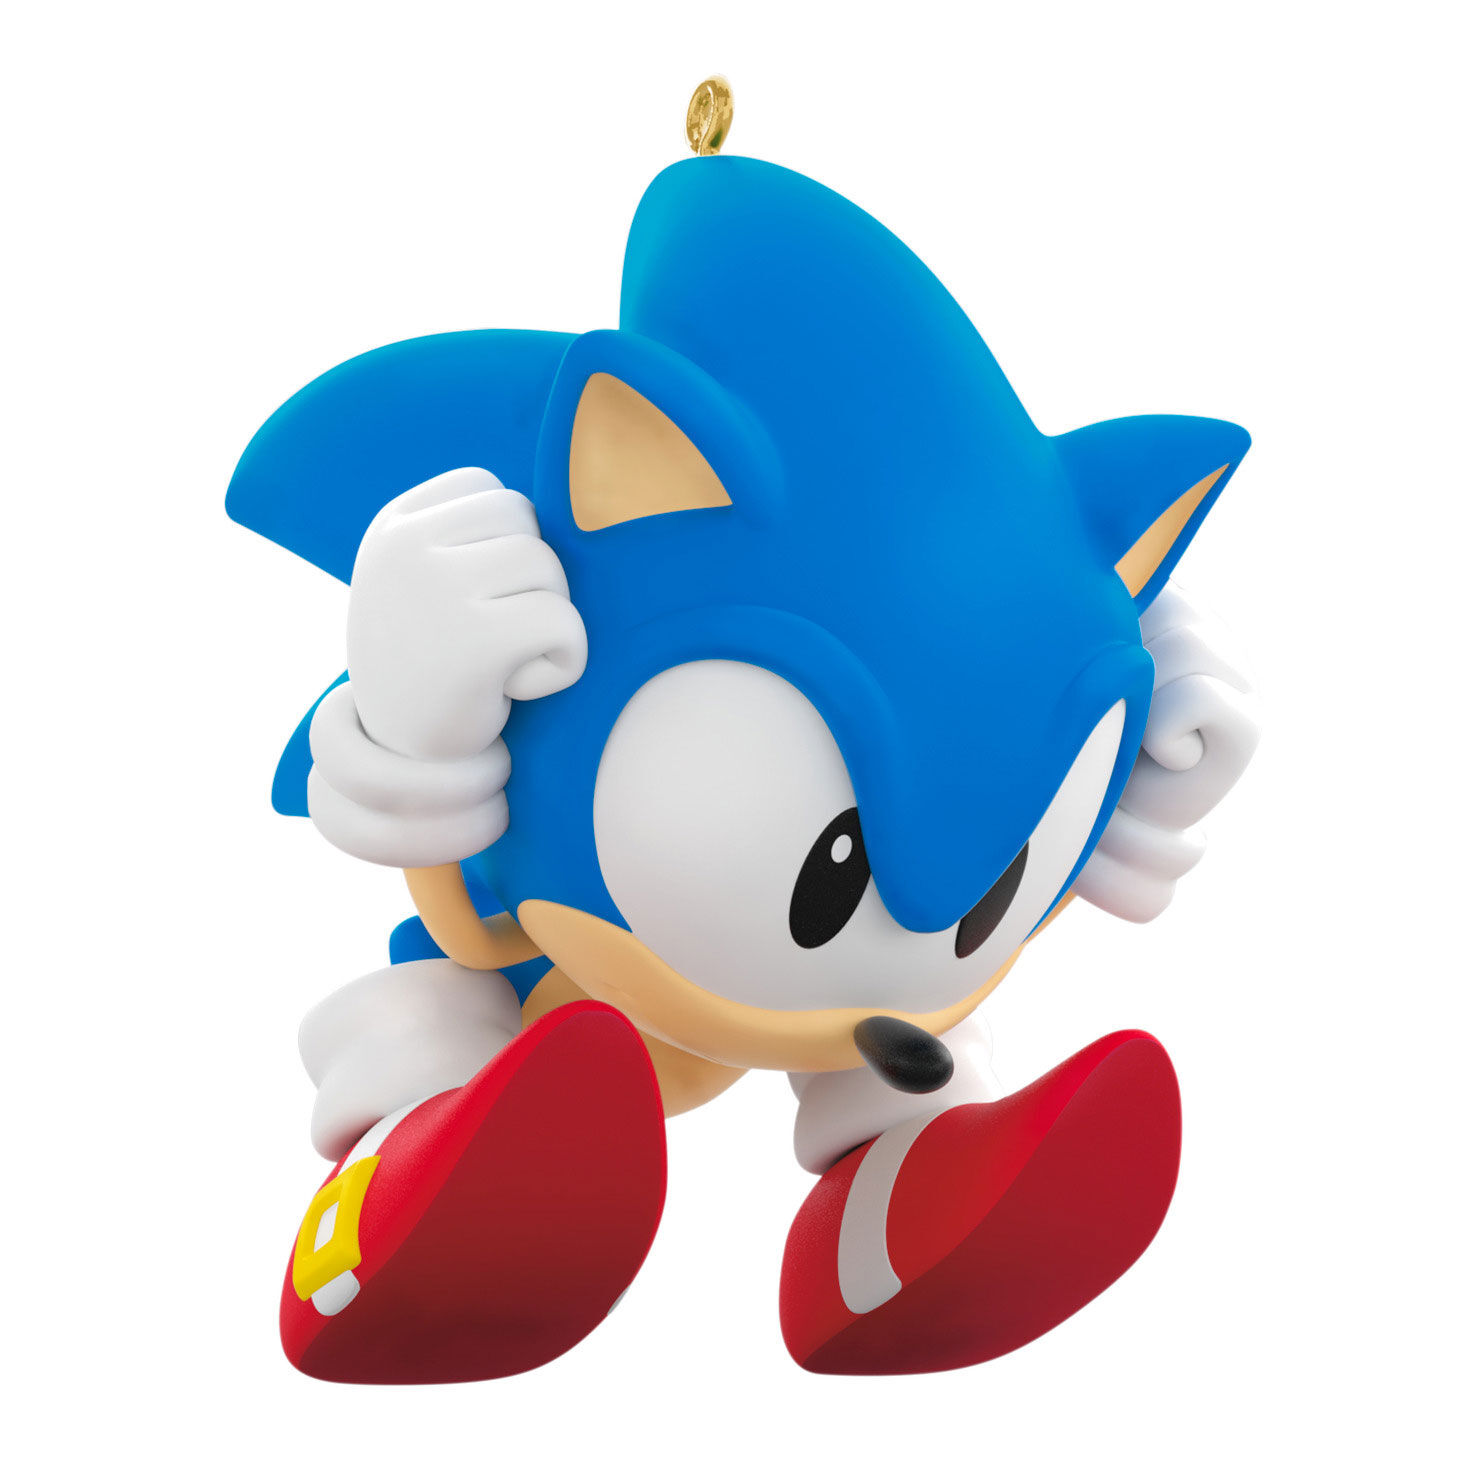 That one sonic colors render : r/SonicTheHedgehog